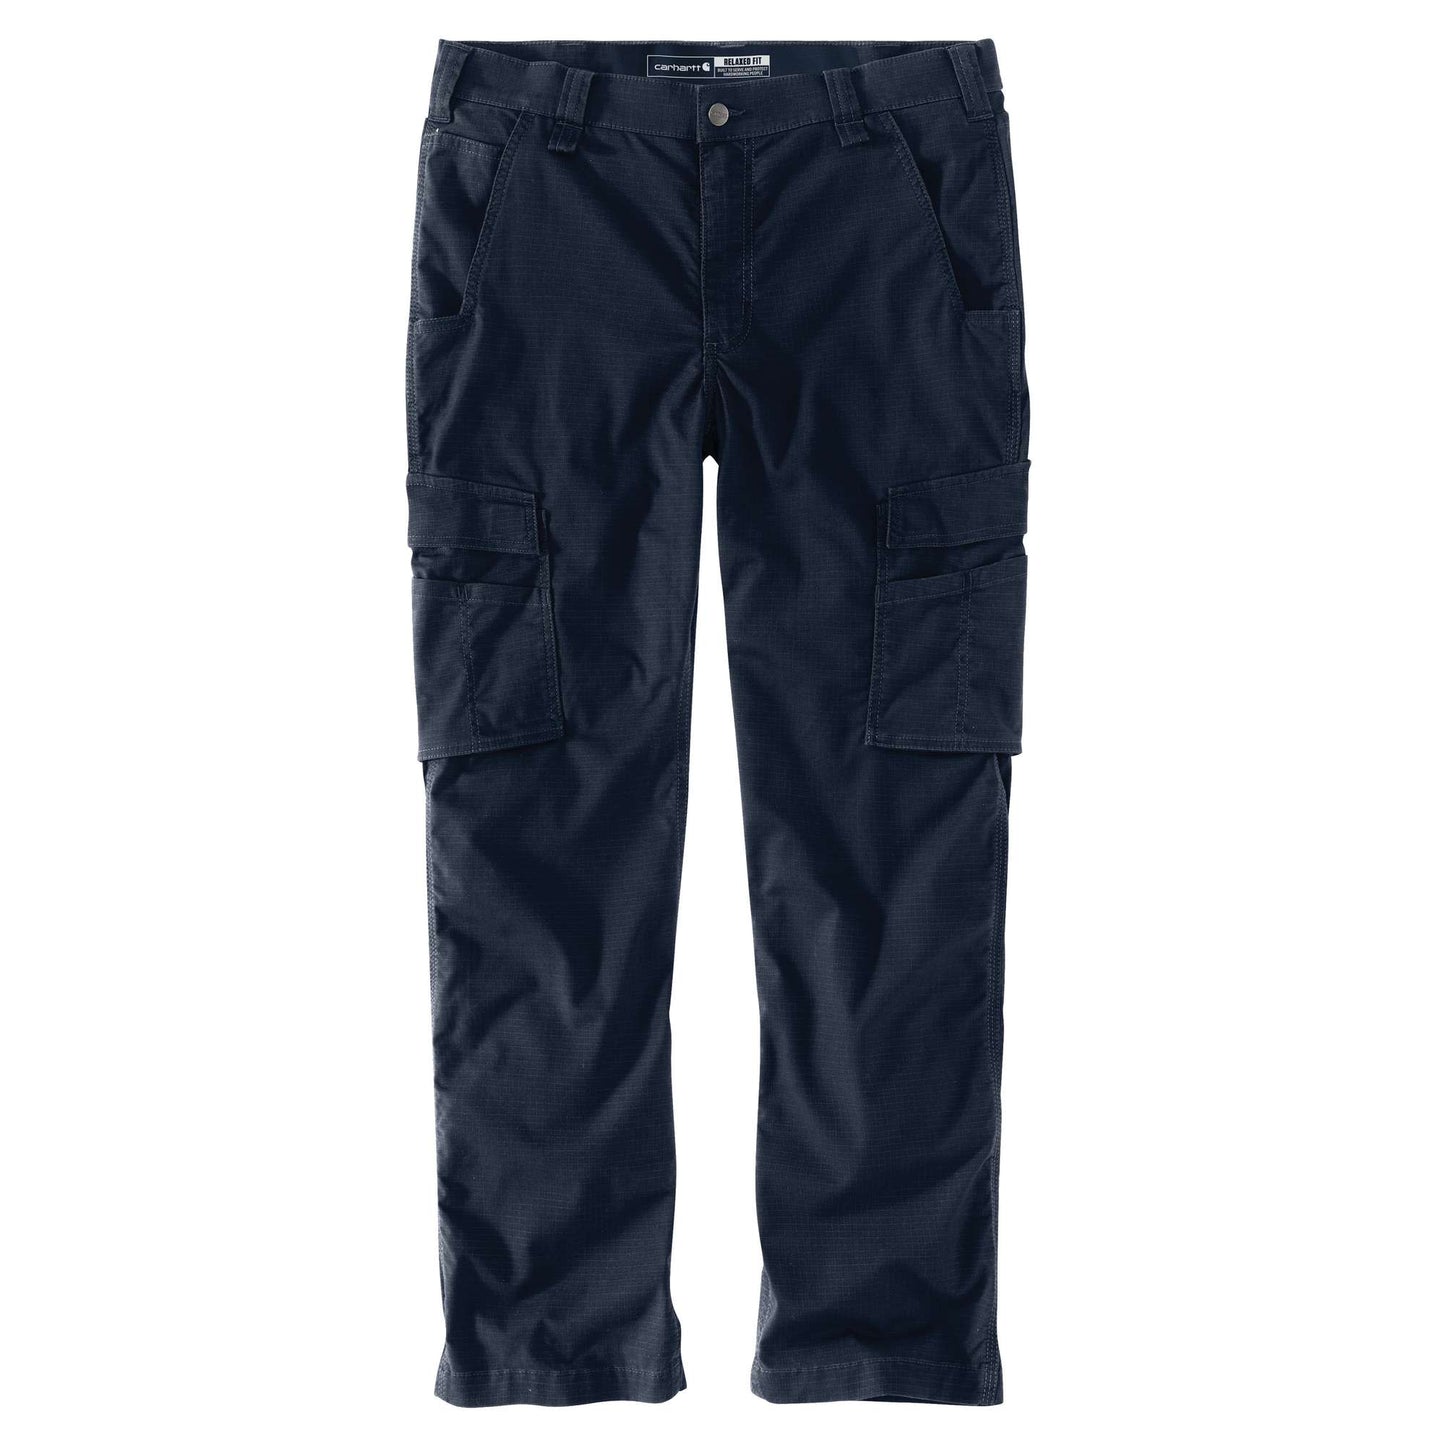 Carhartt Men's Force Relaxed Fit Ripstop Cargo Work Pants